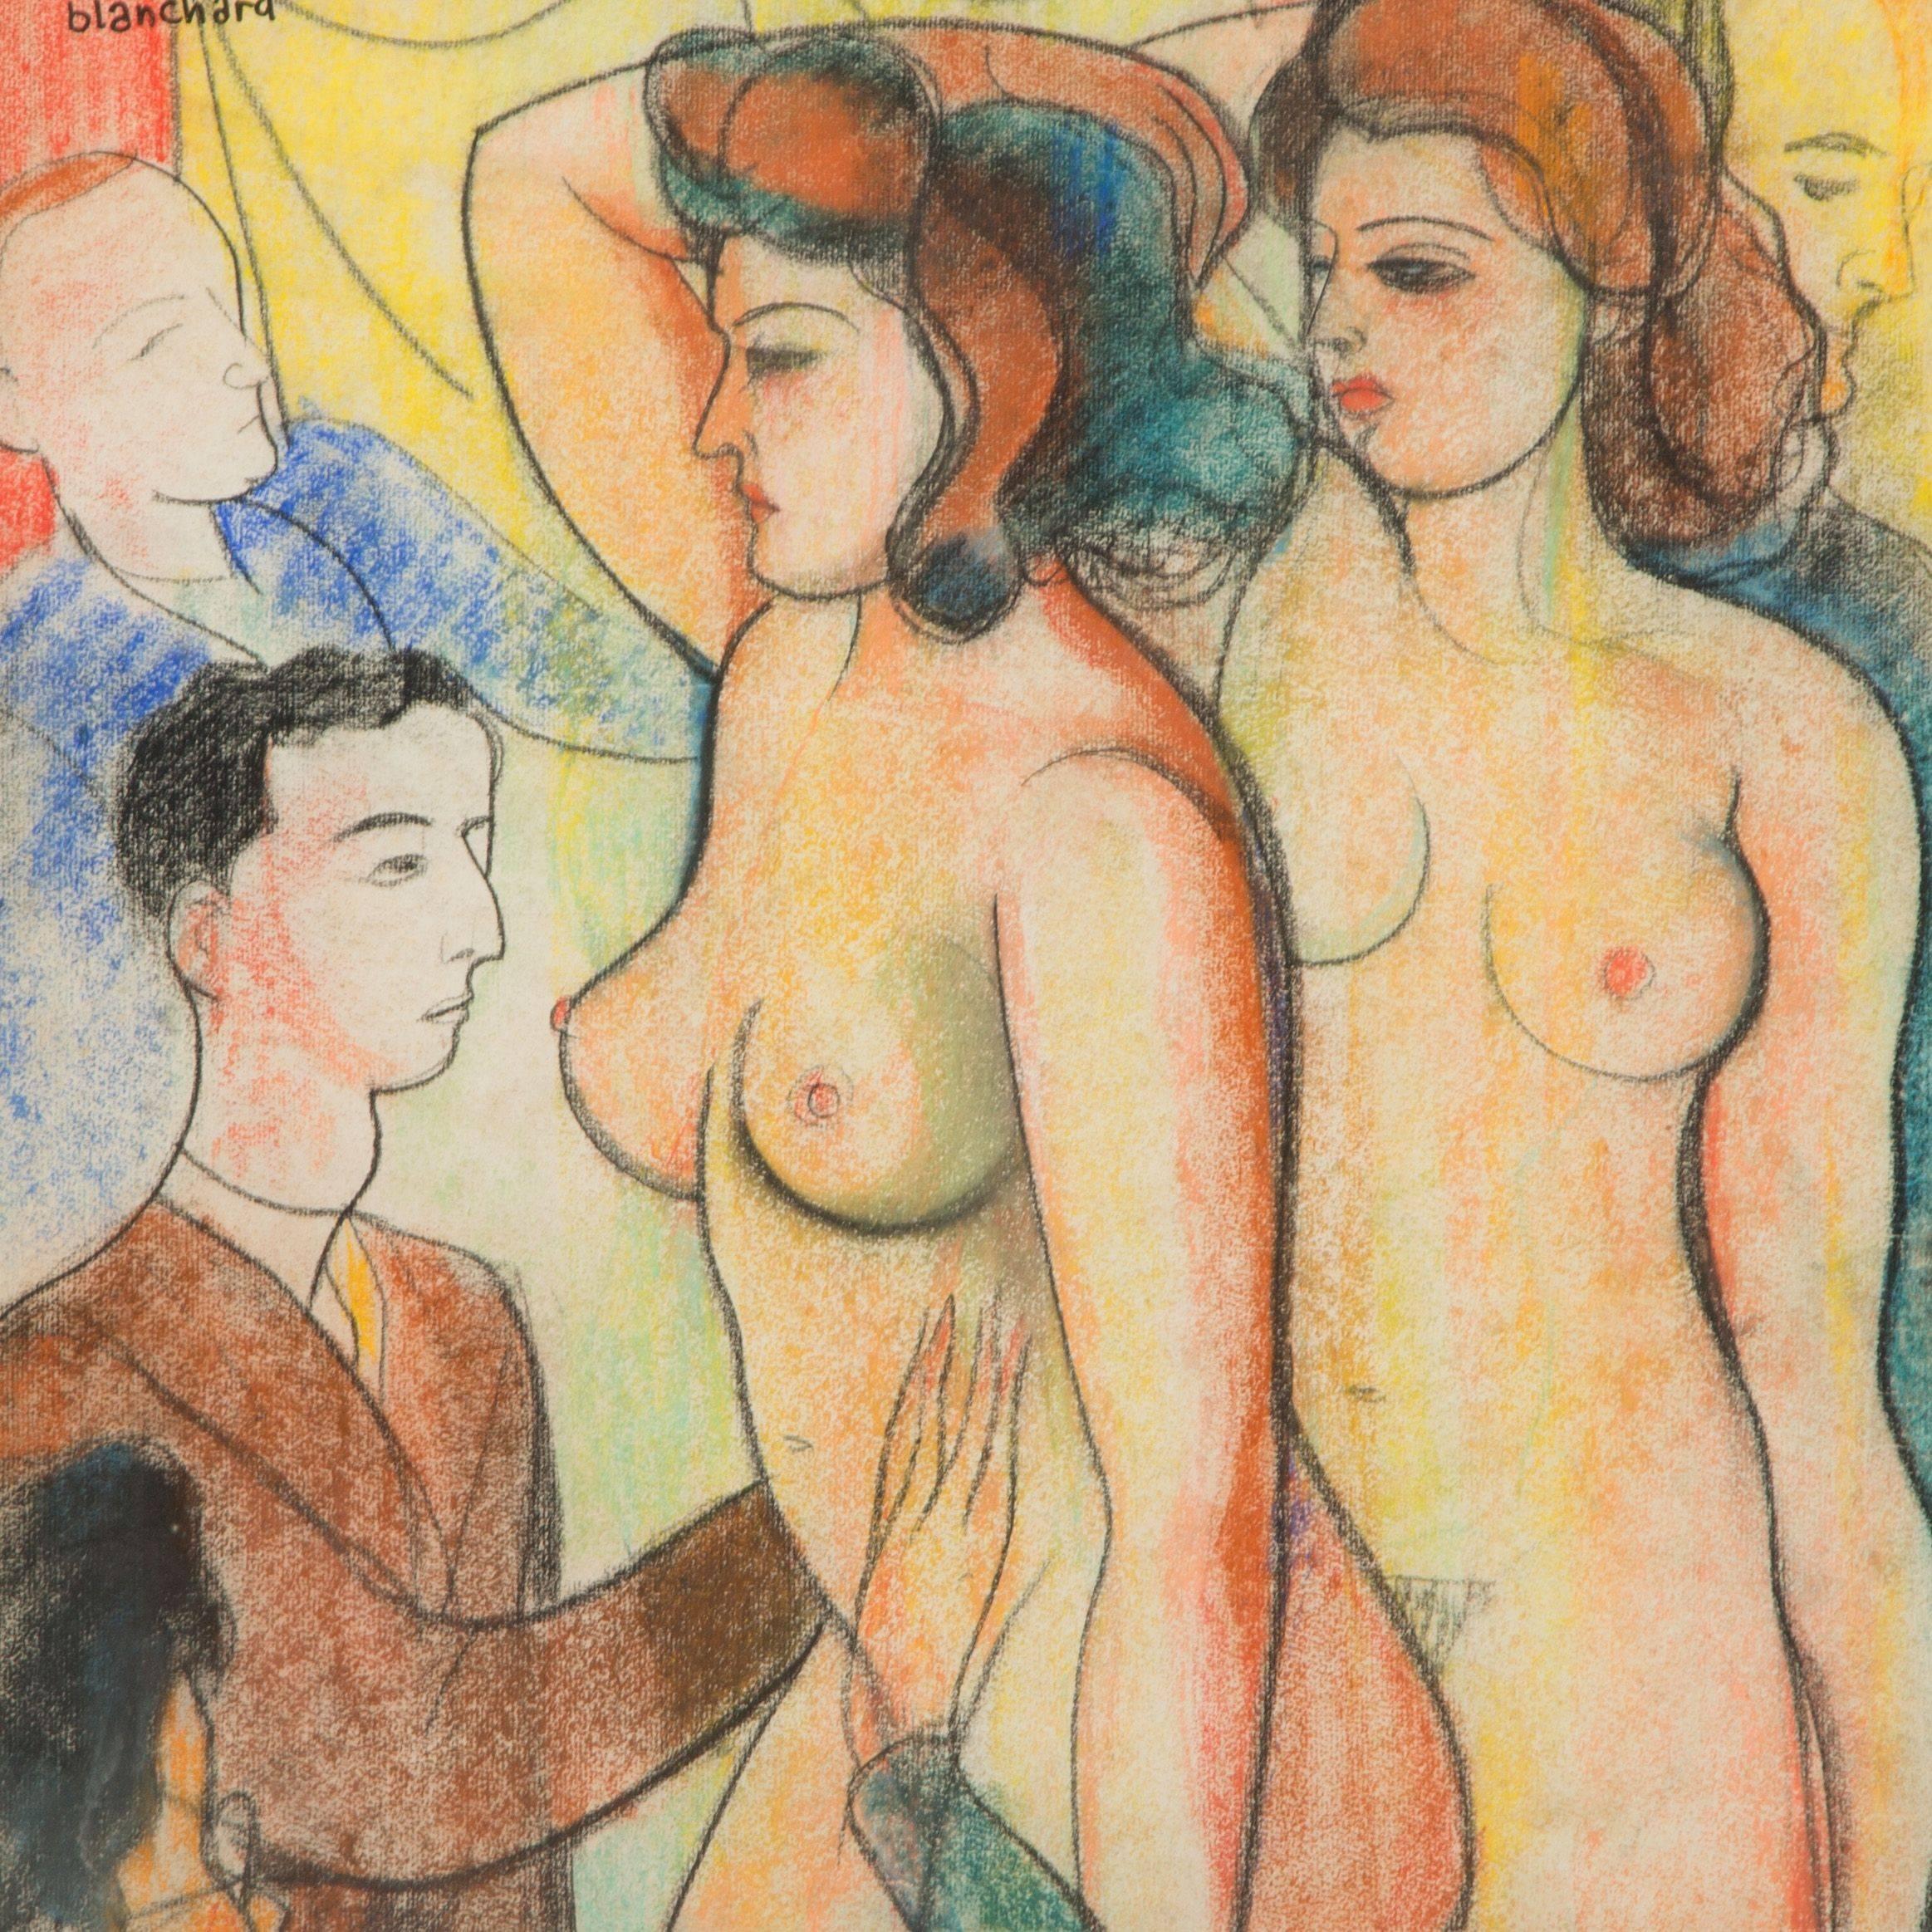 The nude woman models - Art by Maurice Blanchard